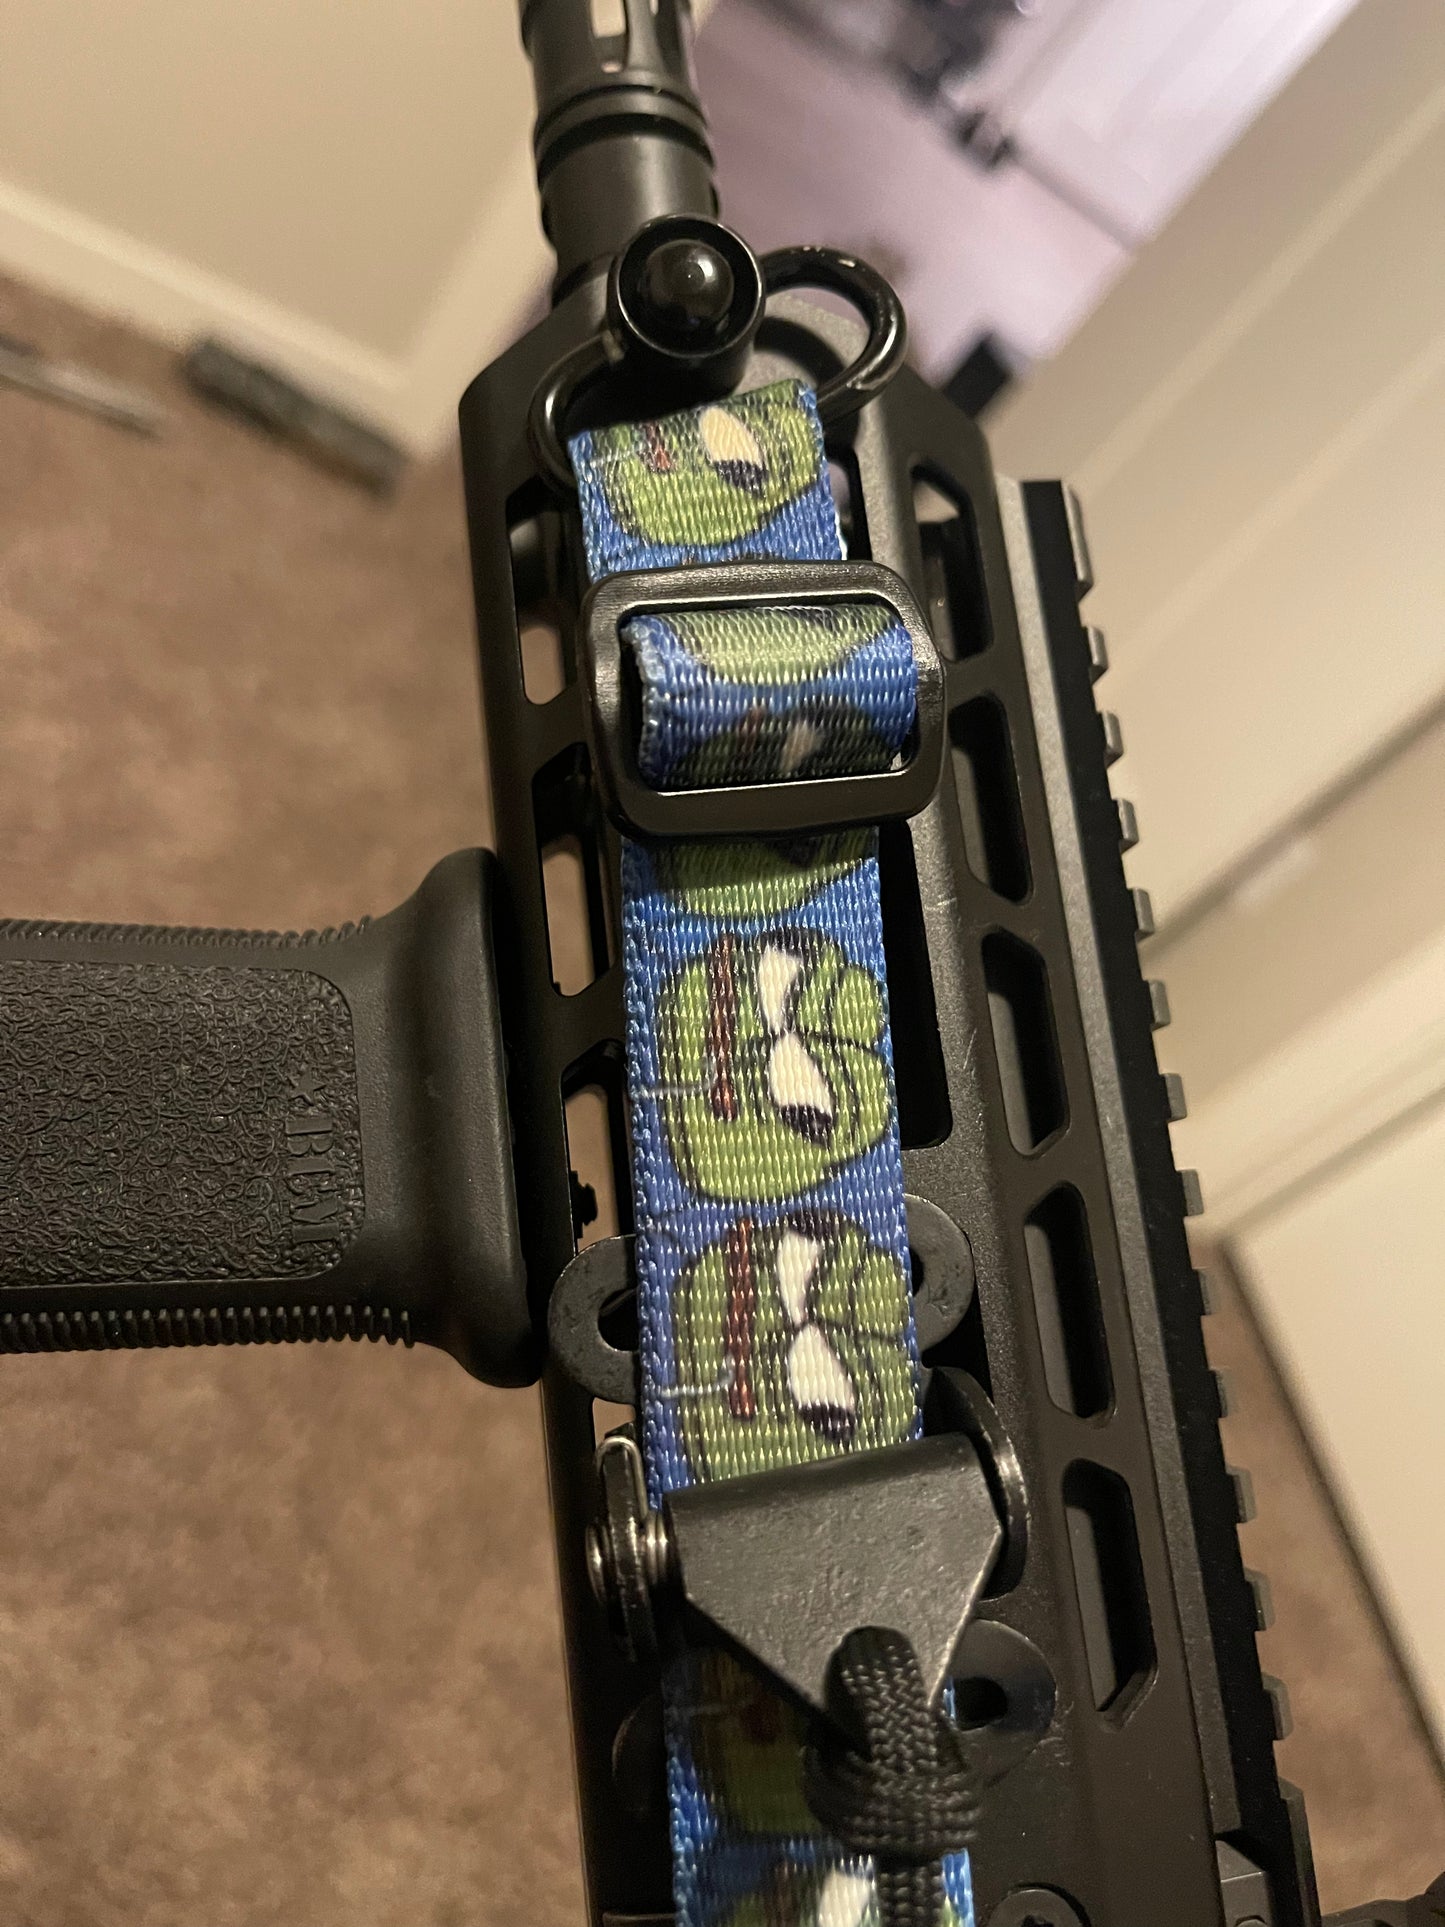 Pre-order for PePe TaCtICaL FrEn SLiNg